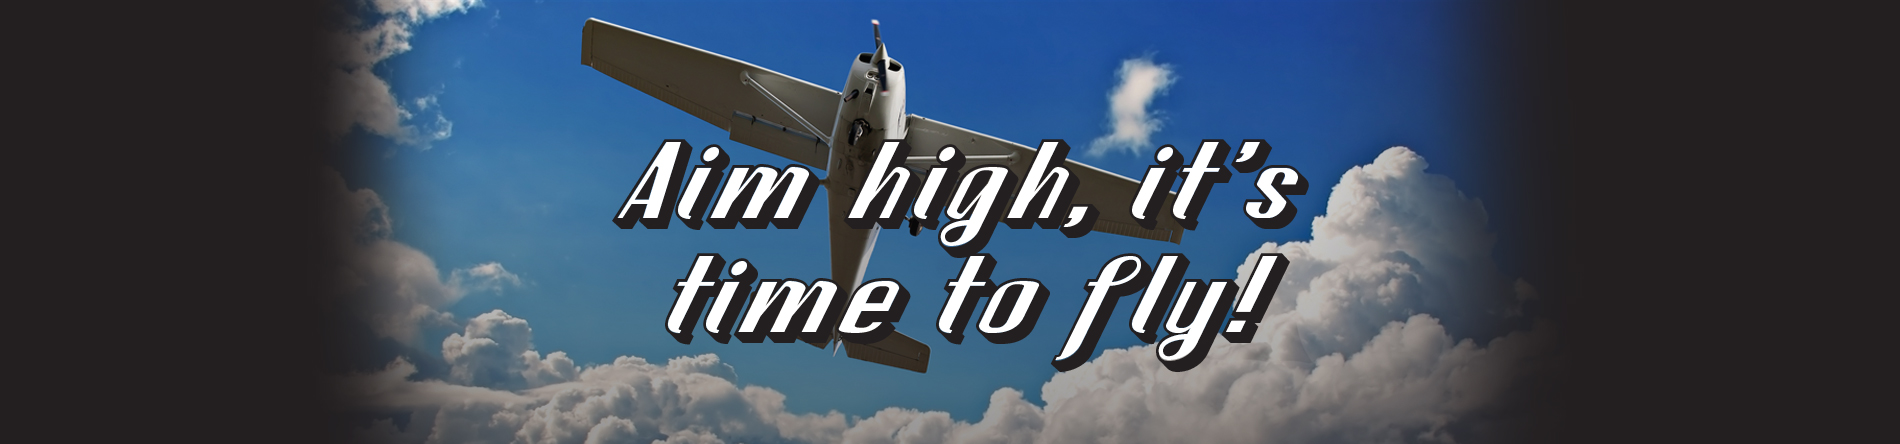 Aim high, it's time to fly!